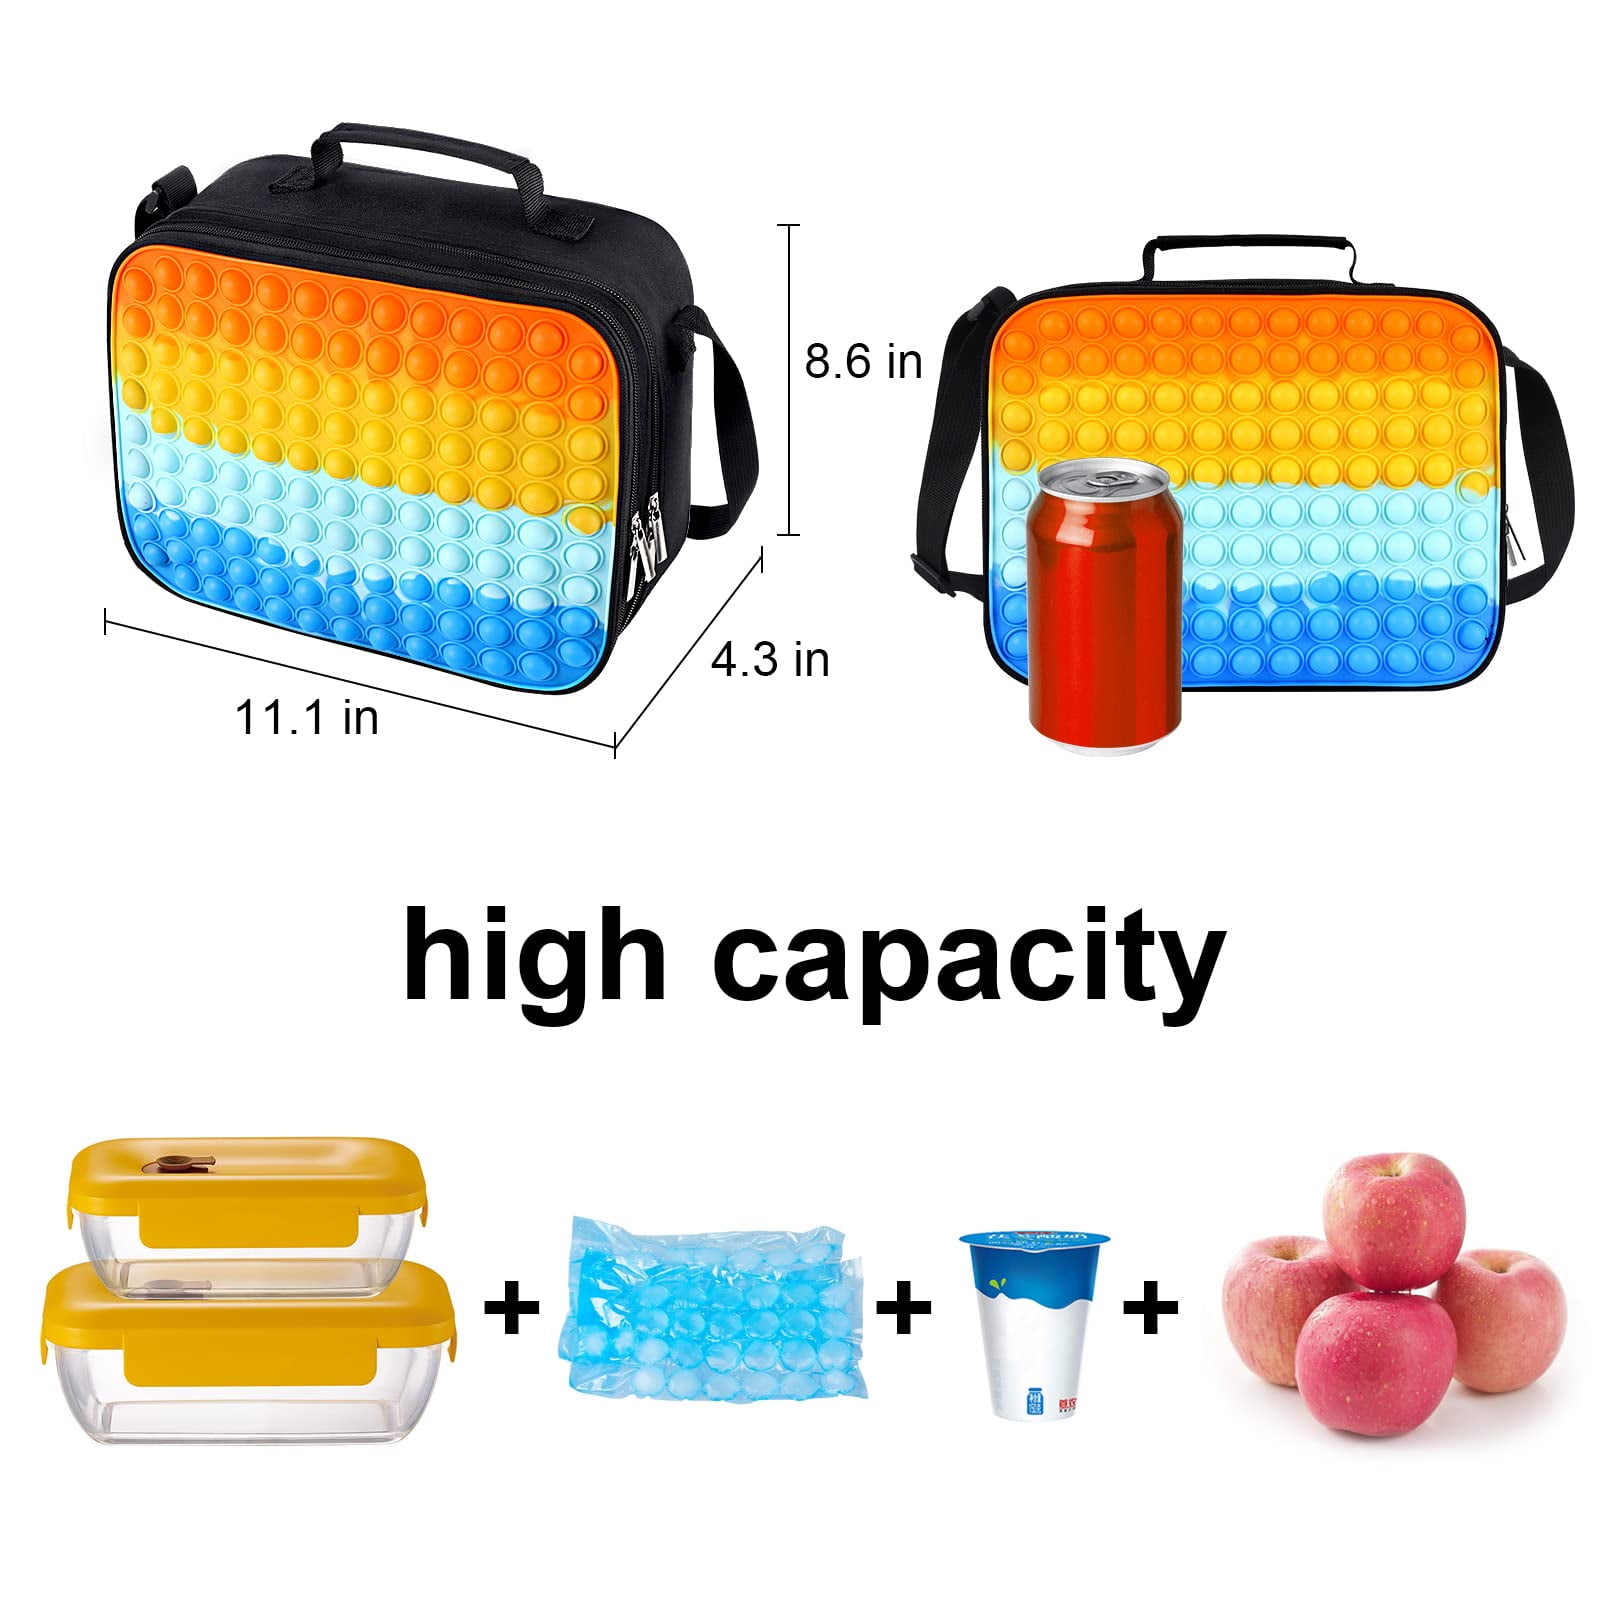 Wsslon Girls Pop Lunch Box,Kids School Insulated Lunch Bag,Back to School  Lunch Large Tote Bag for School Office,Leakproof Cooler Lunch Box with